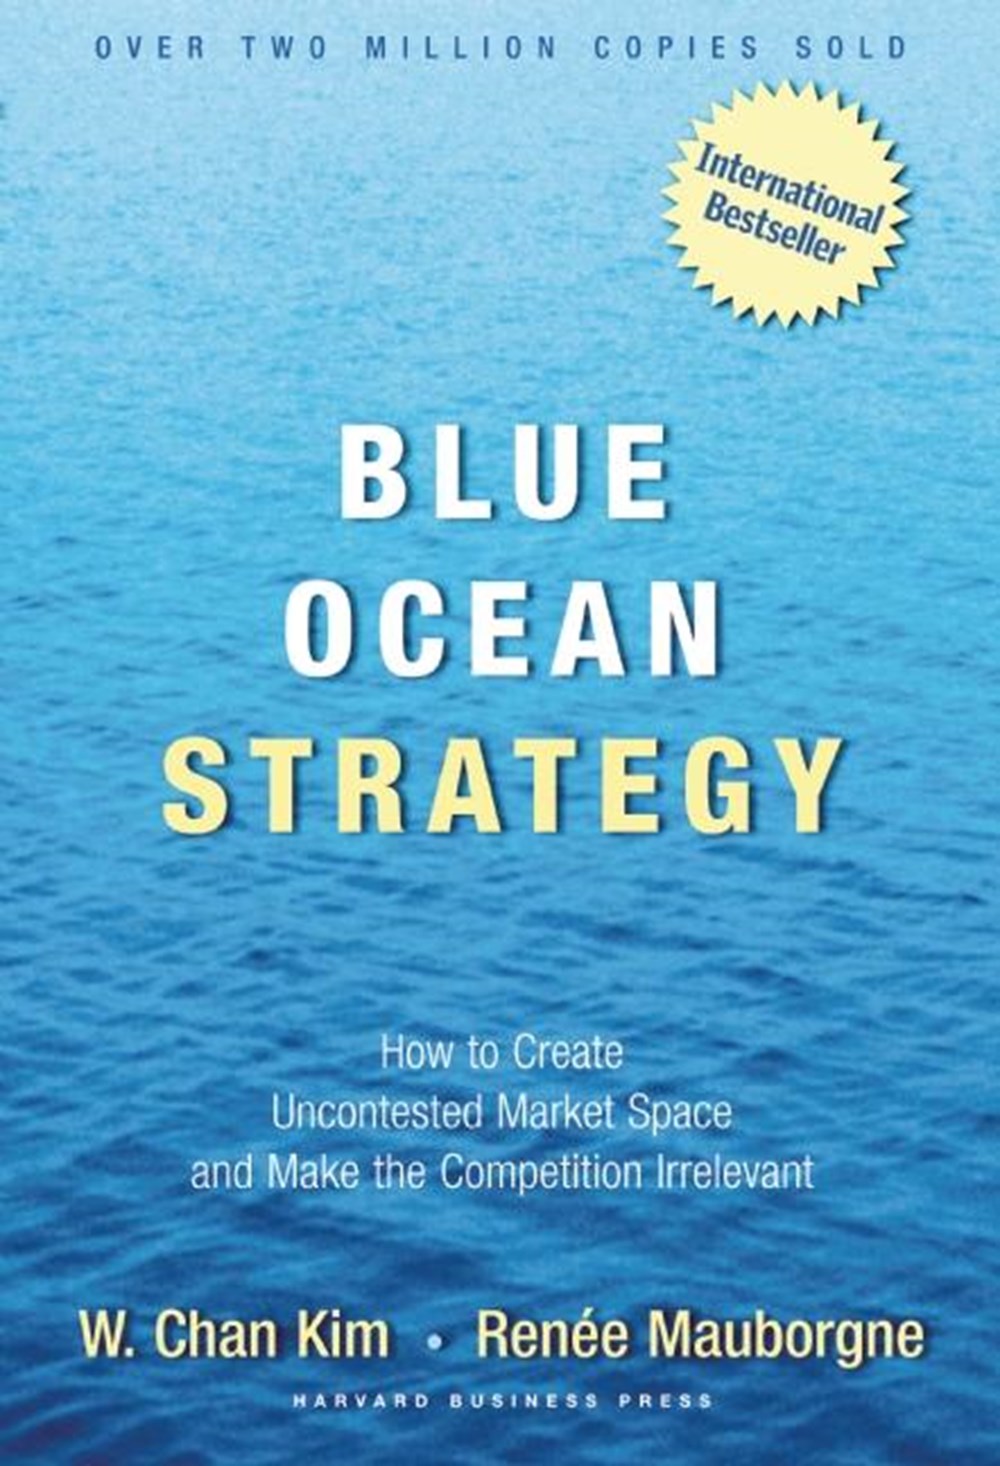 Blue Ocean Strategy How to Create Uncontested Market Space and Make the Competition Irrelevant